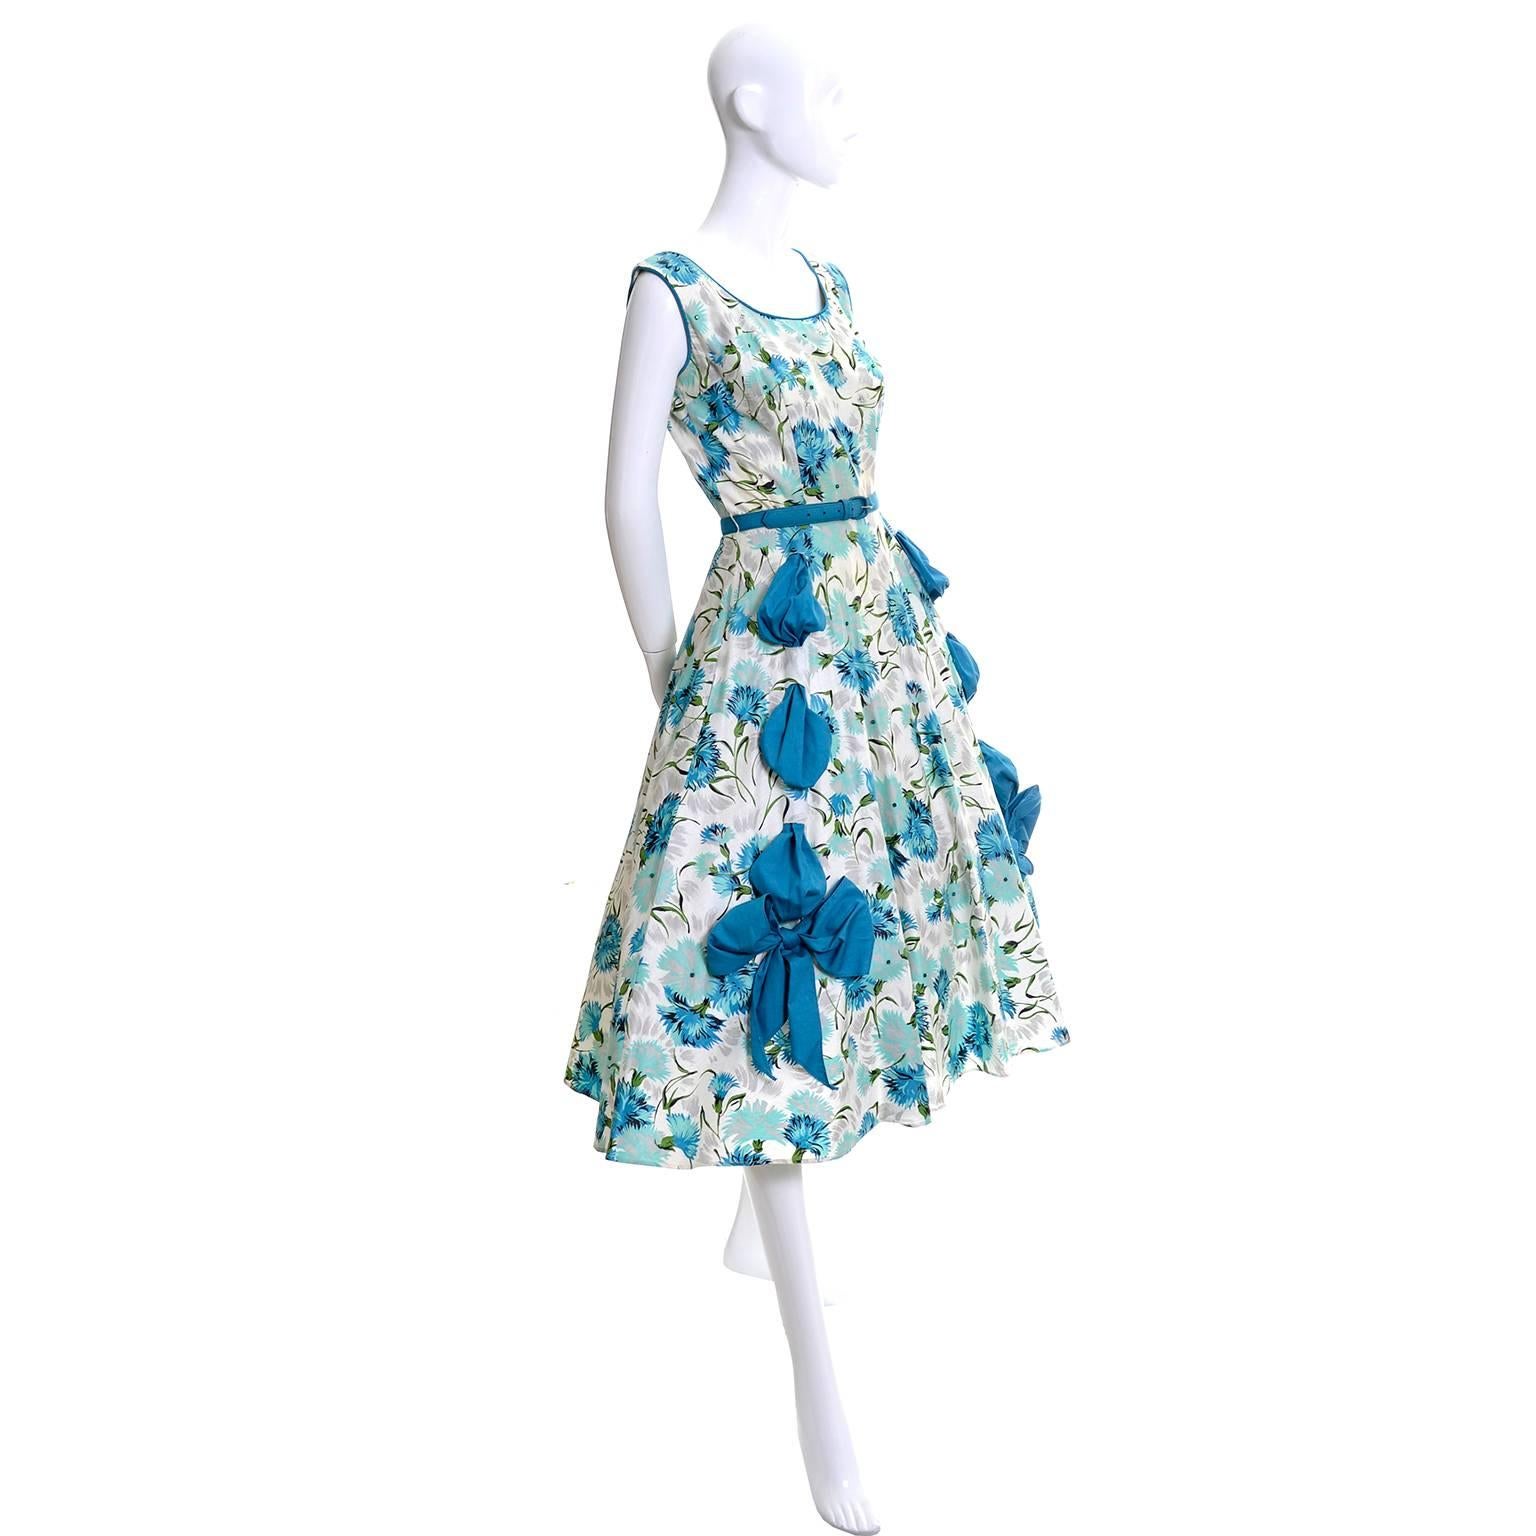 This is a fabulous 1950's vintage party dress with gorgeous rhinestones and beautiful wide blue ribbons that are threaded through the skirt of the dress and tied in bows at the end.  The sleeveless vintage 50's dress has a side metal zipper and its